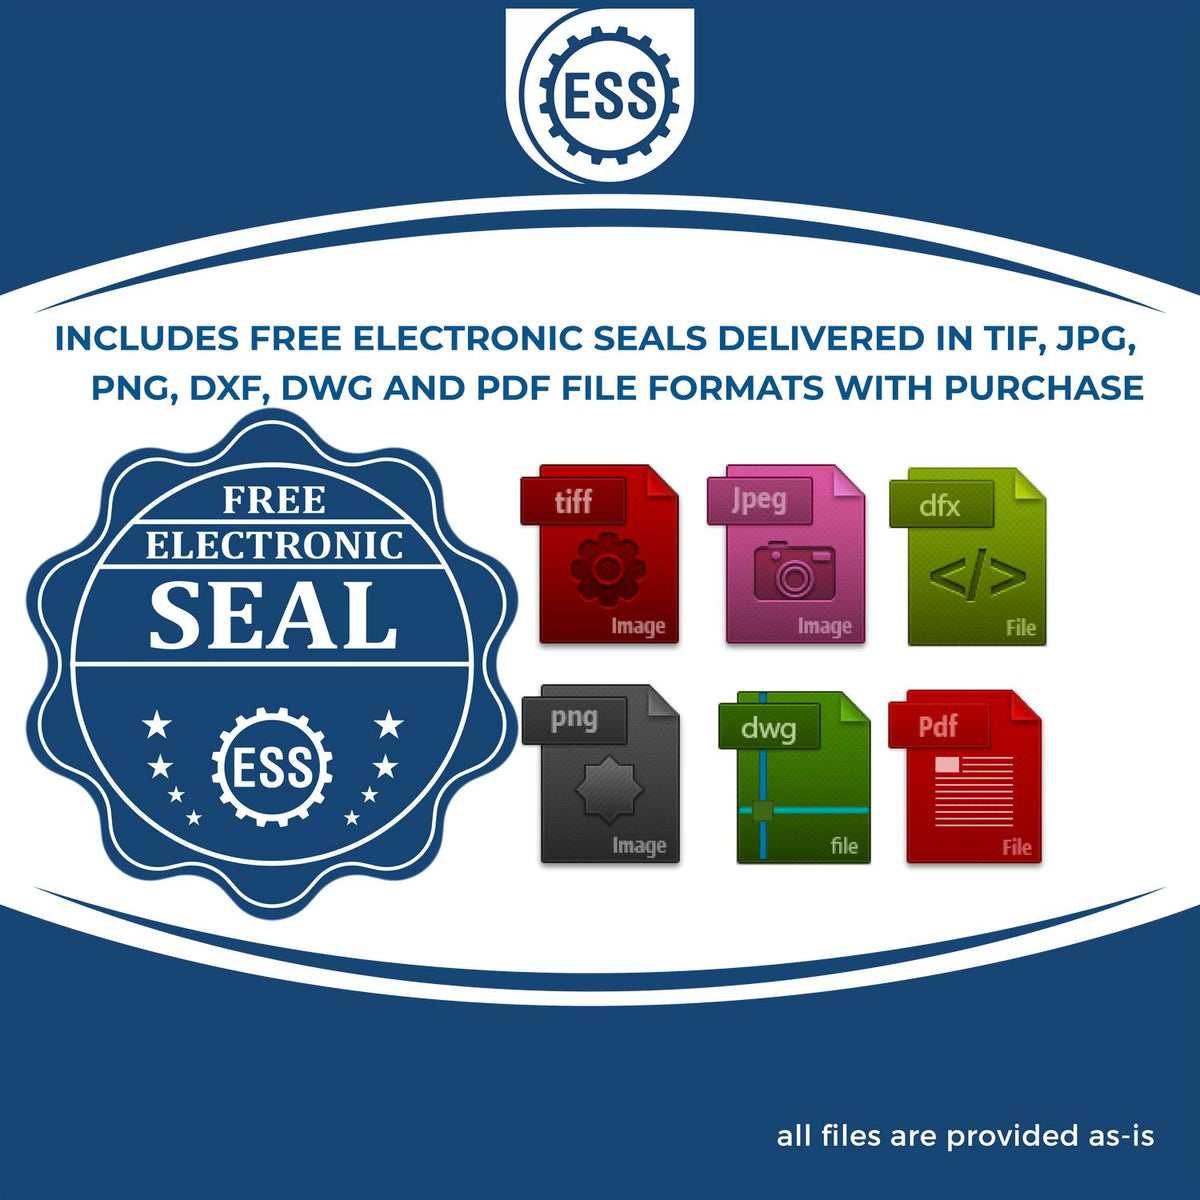 An infographic for the free electronic seal for the North Dakota Desk Architect Embossing Seal illustrating the different file type icons such as DXF, DWG, TIF, JPG and PNG.